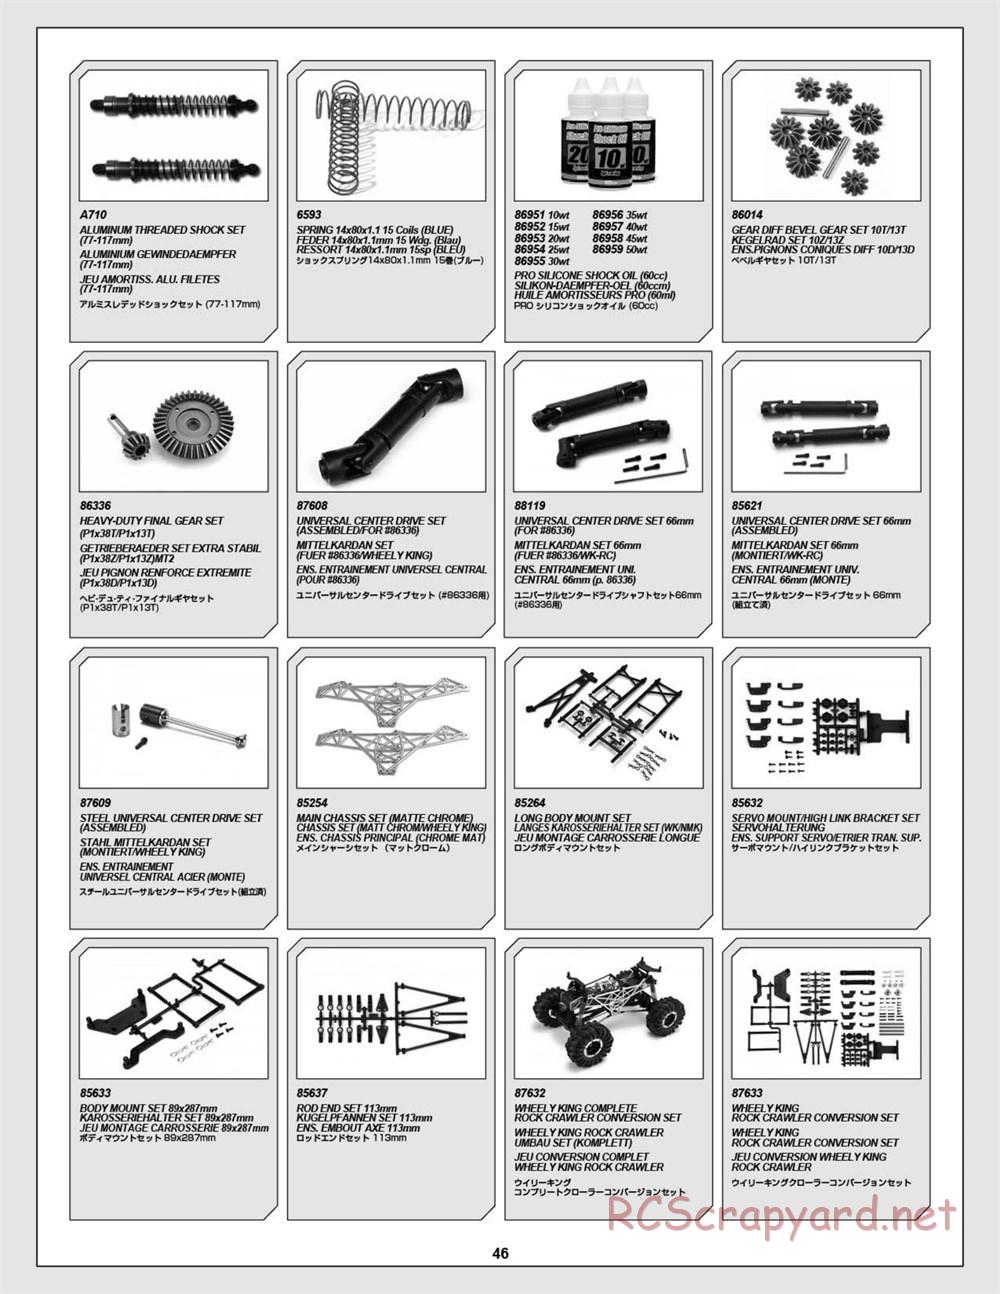 HPI - Wheely King 4x4 - Manual - Page 46